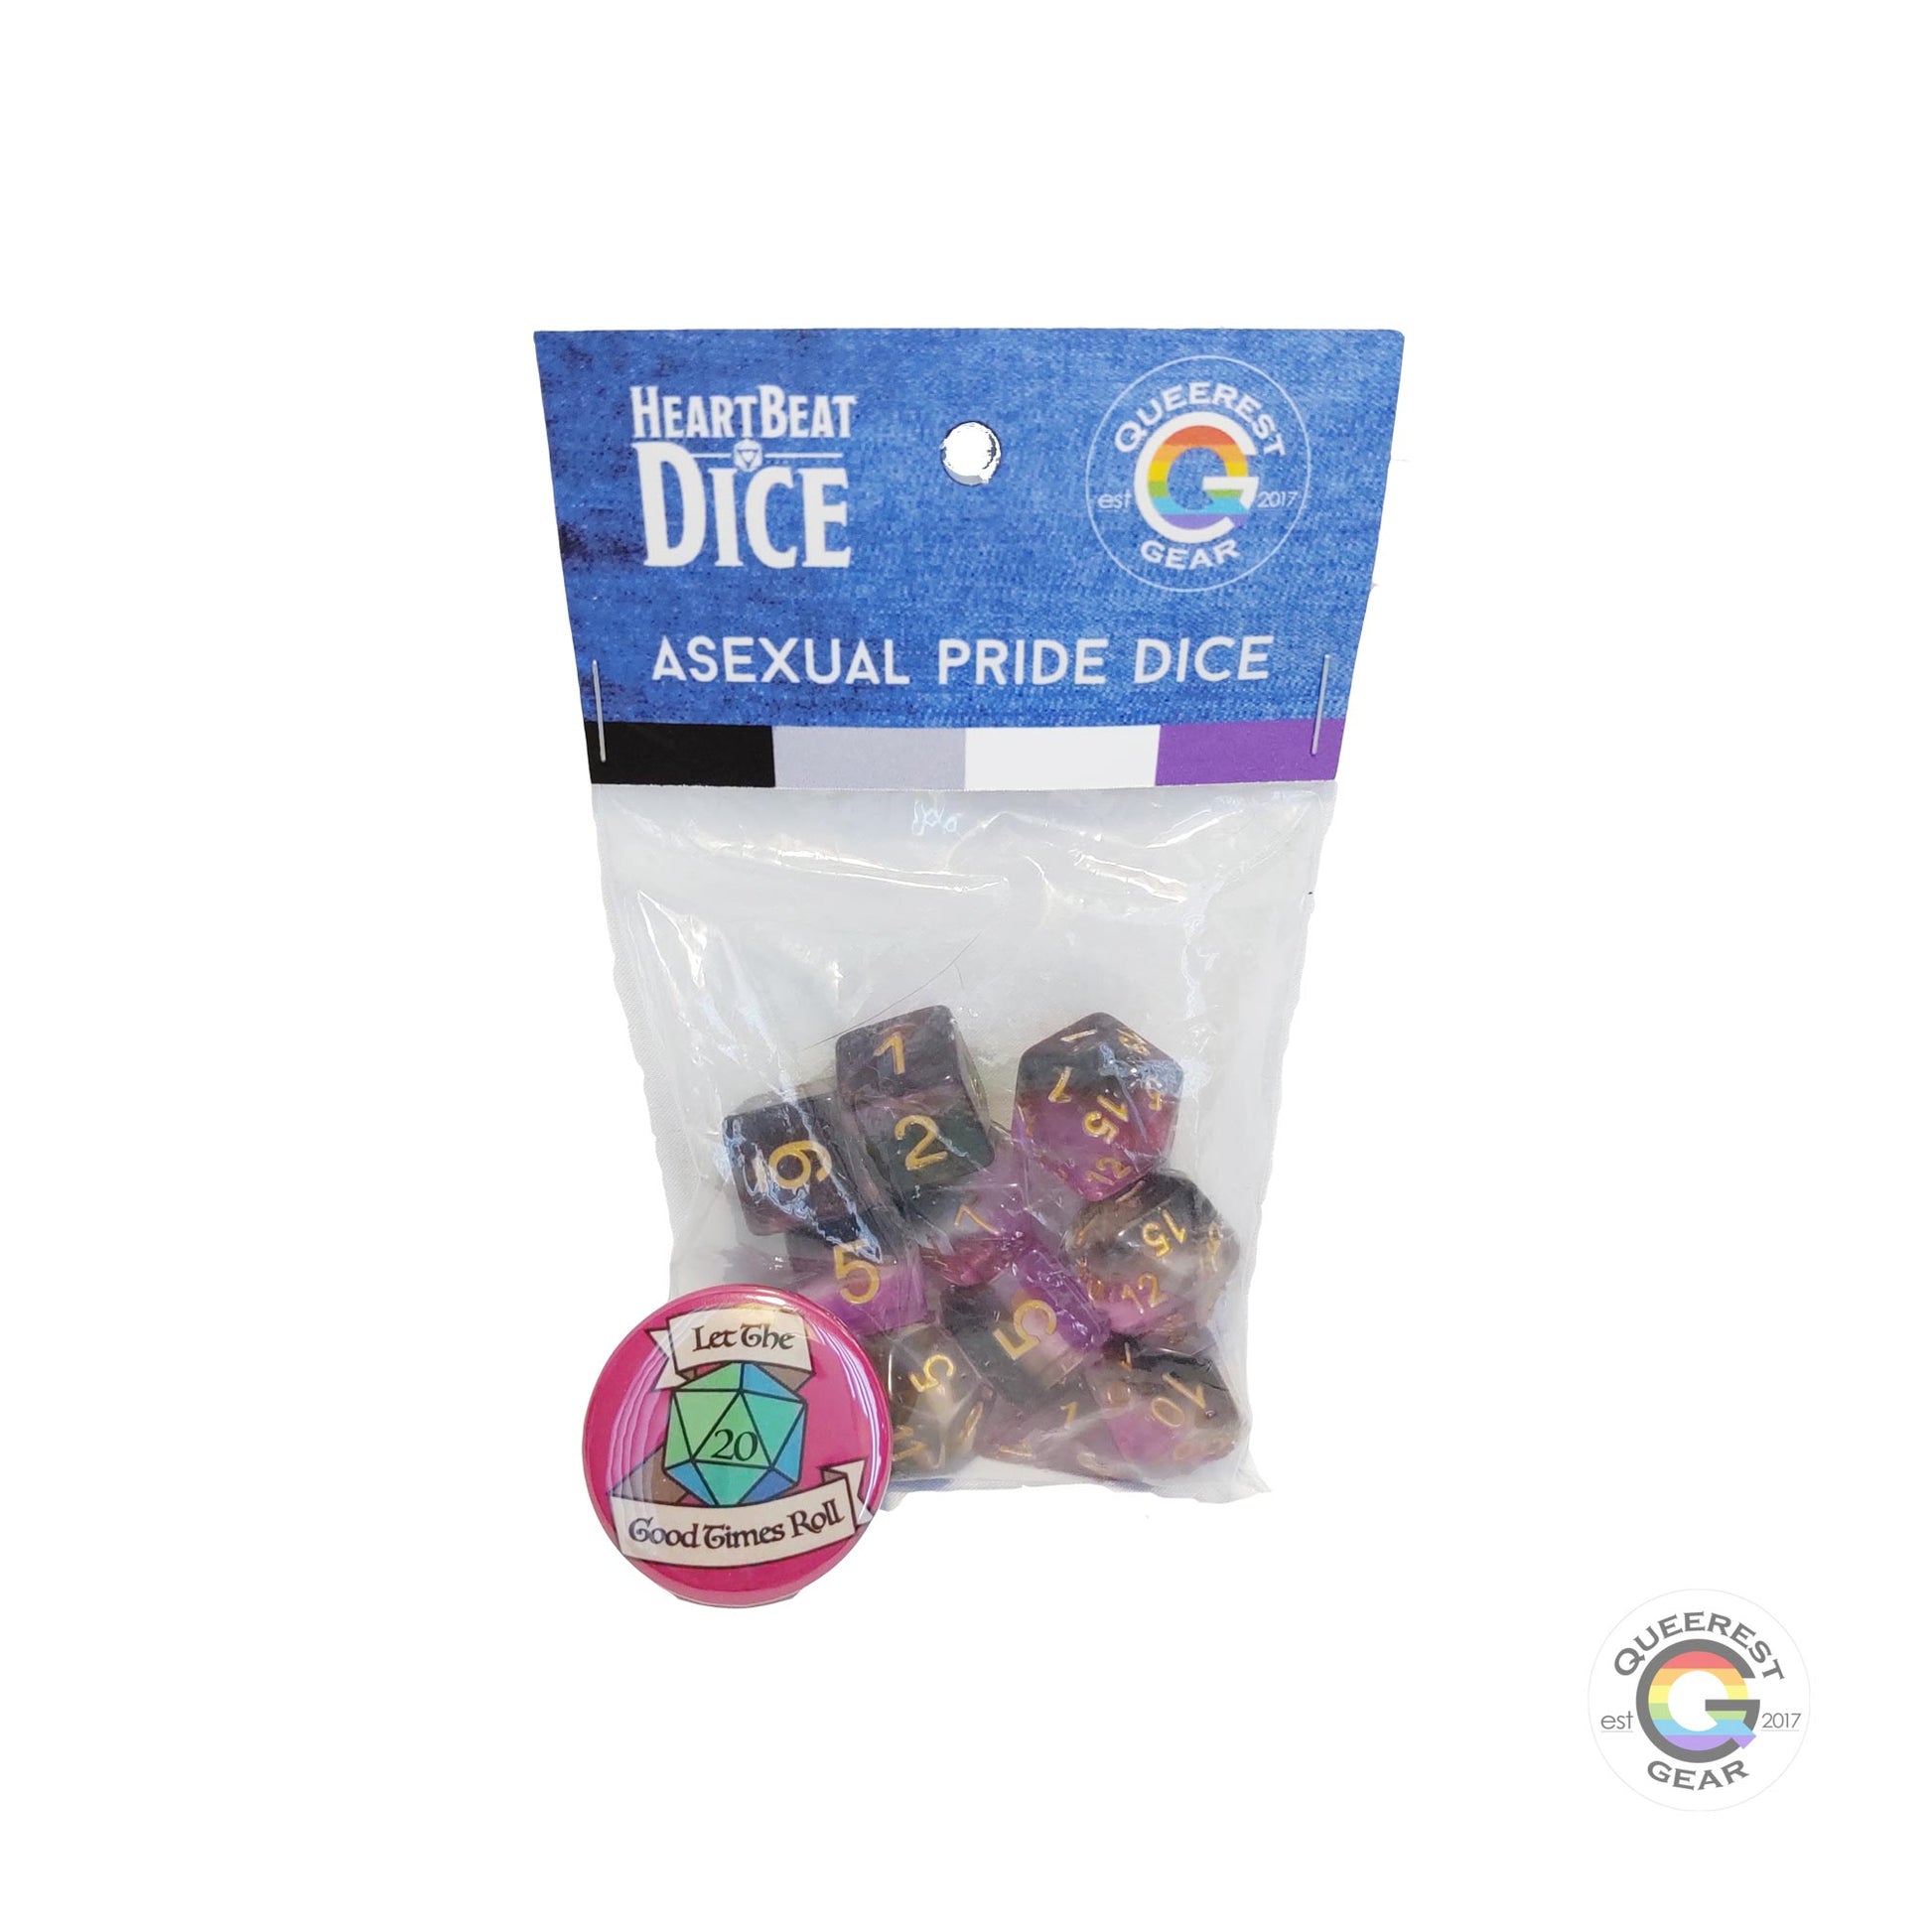  Asexual pride dice in their packaging with a free “let the good times roll” button